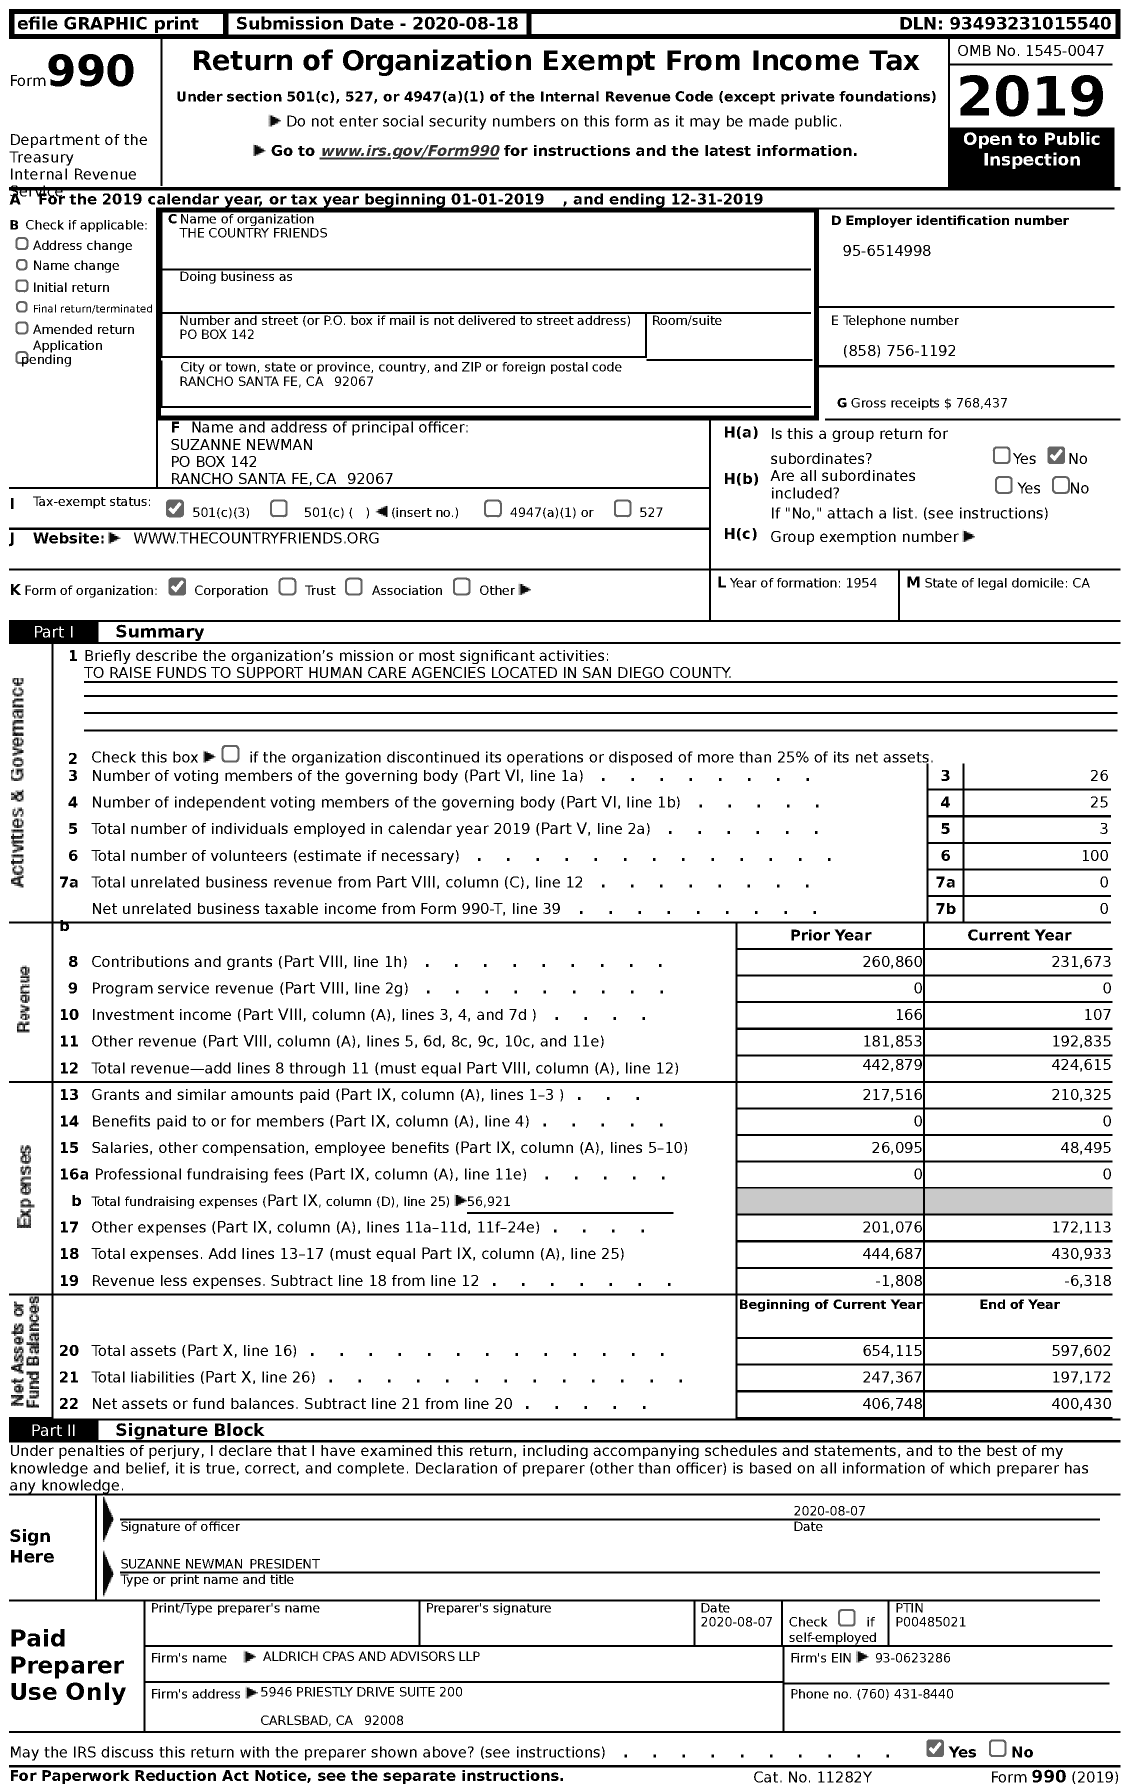 Image of first page of 2019 Form 990 for The Country Friends